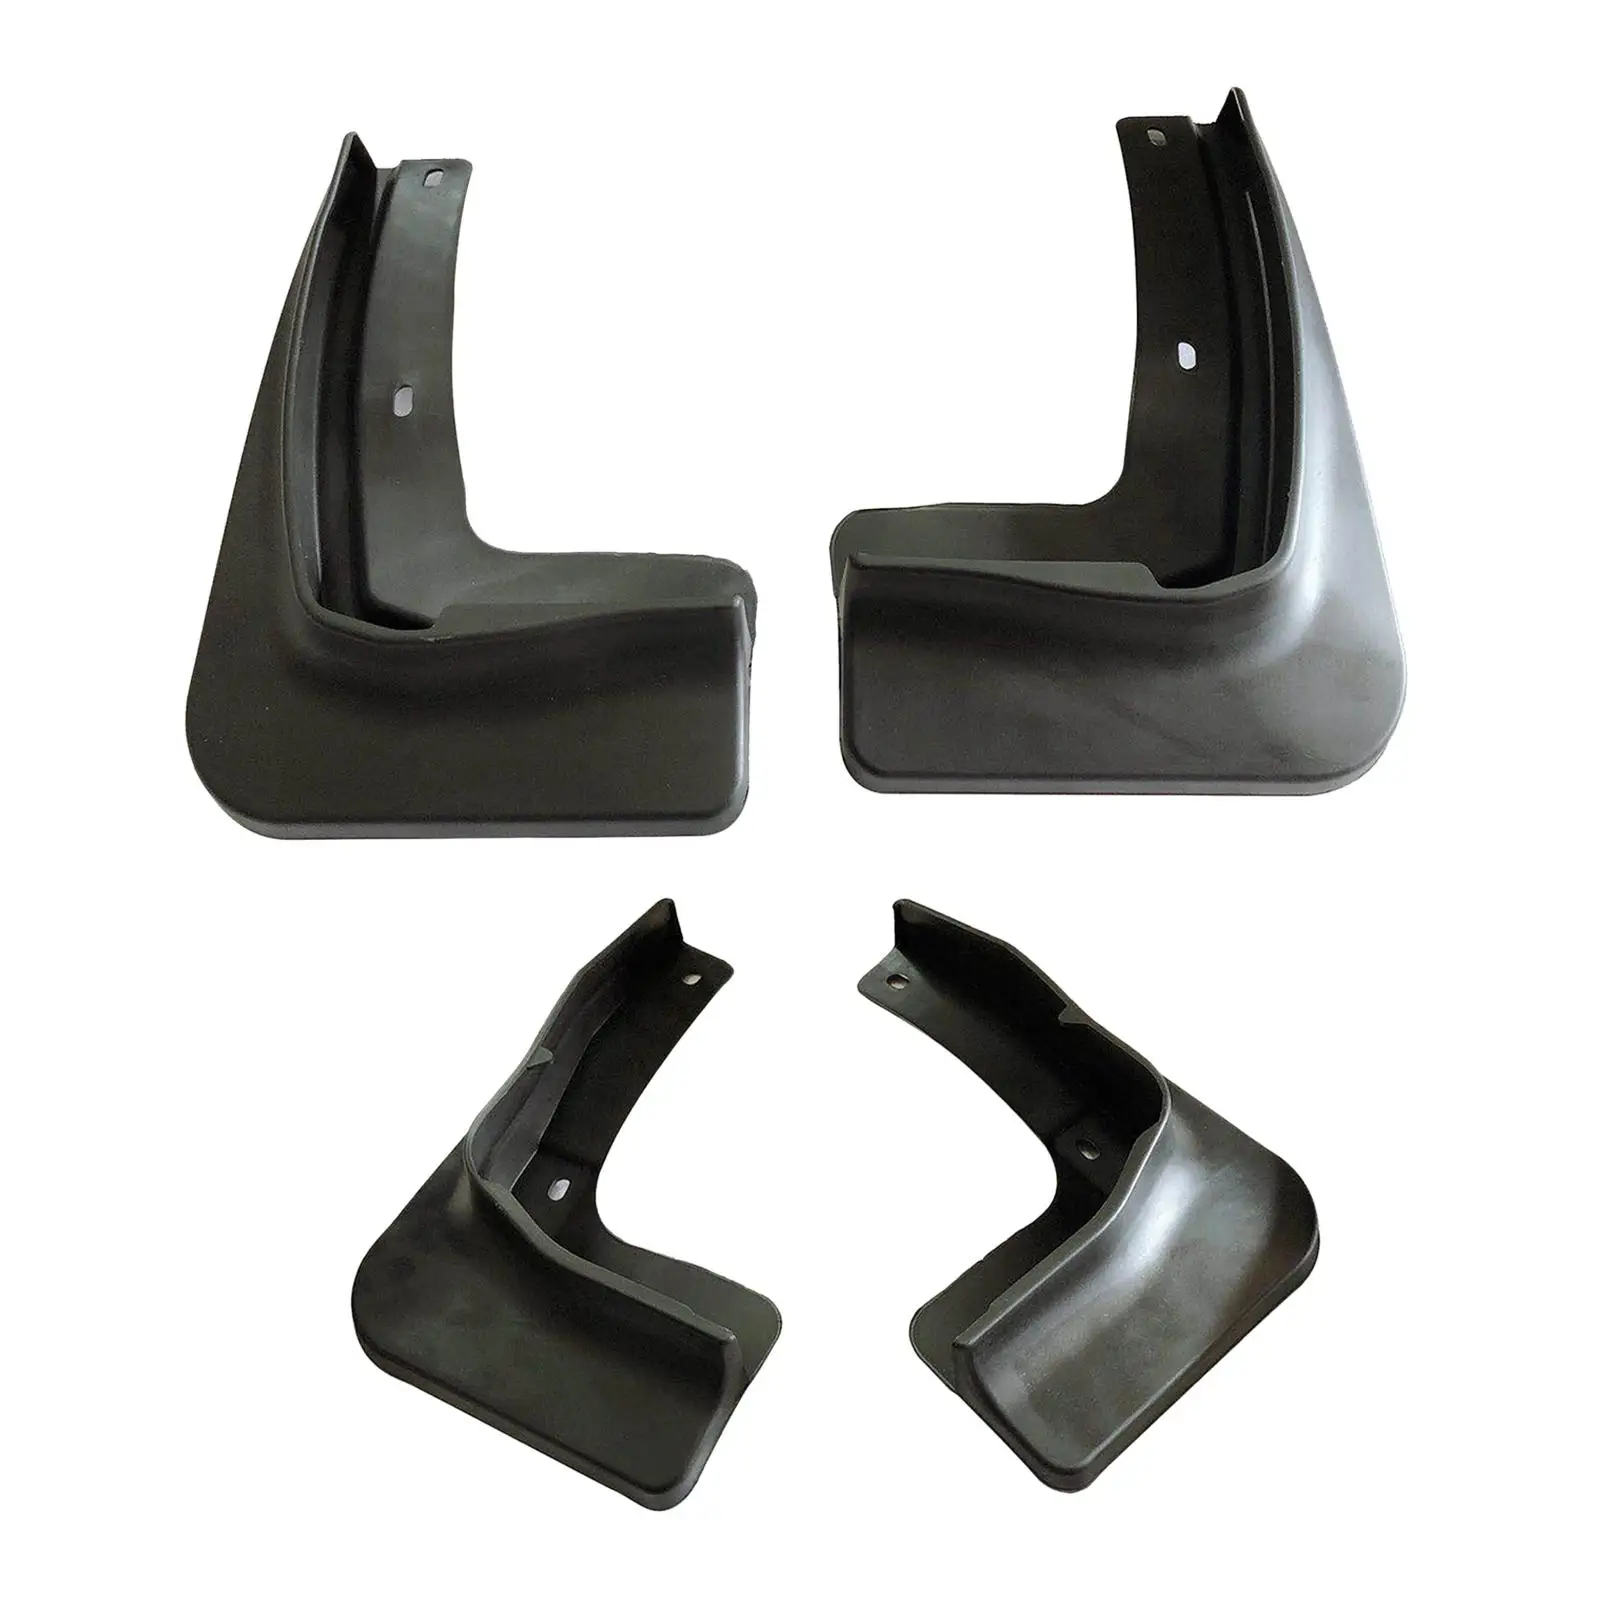 4x Car Mudguard Muds Guard Flap Easy to Install for Byd Yuan Plus